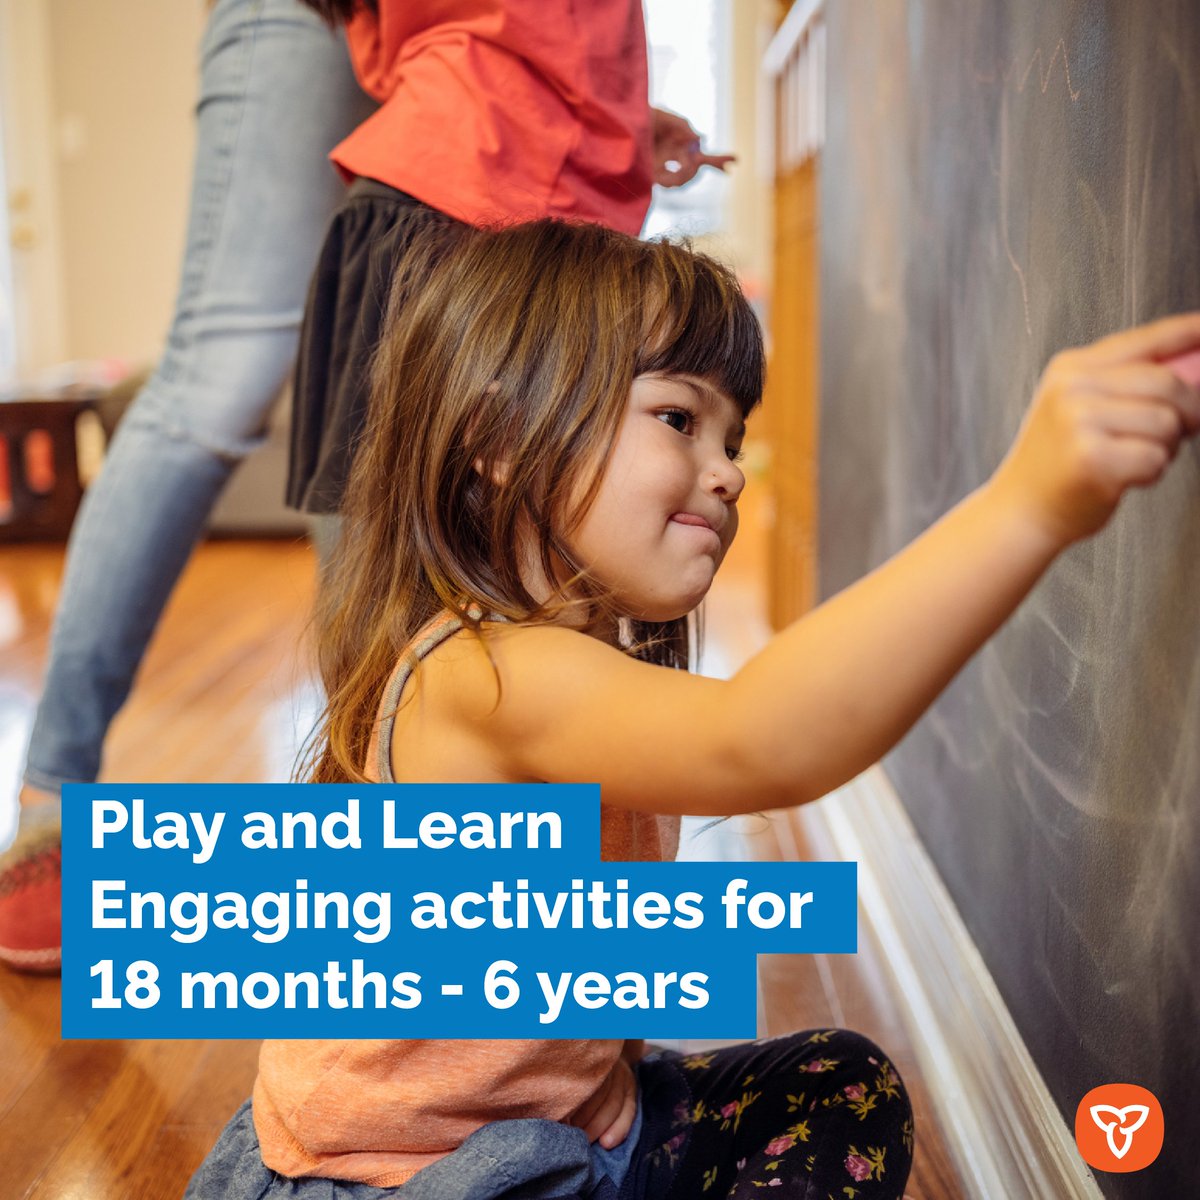 A picture is worth a thousand words.
Spark your child’s imagination and help them learn new words while exploring books and magazines together.
playandlearn.healthhq.ca/en/toddlers/la…
#SpeechandHearingMonth #PlayandLearn